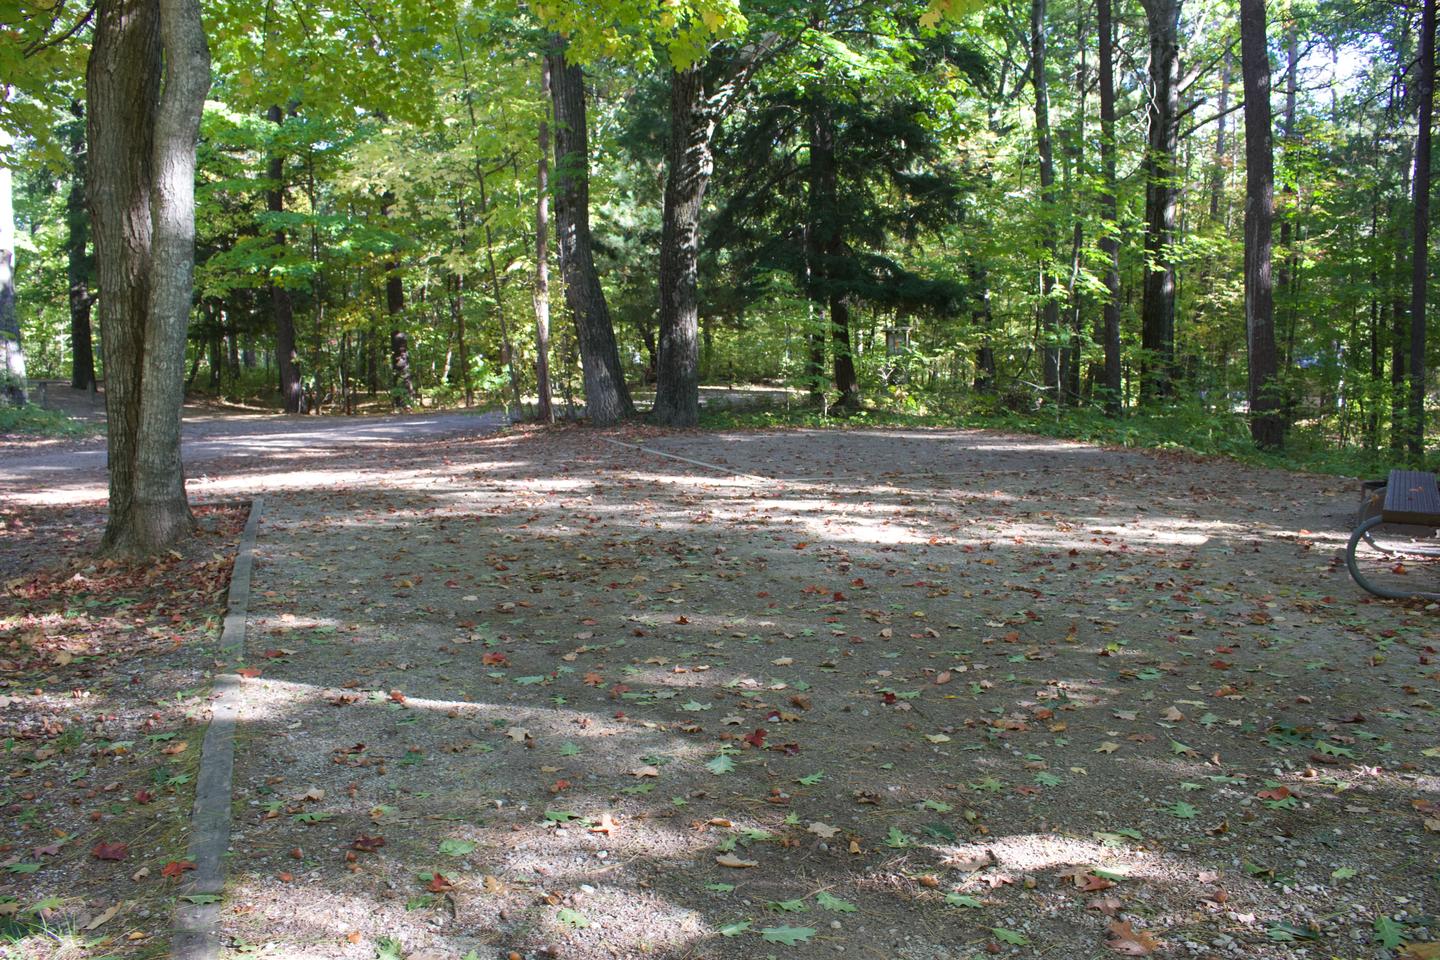 Campsite #77, view from the site toward the road